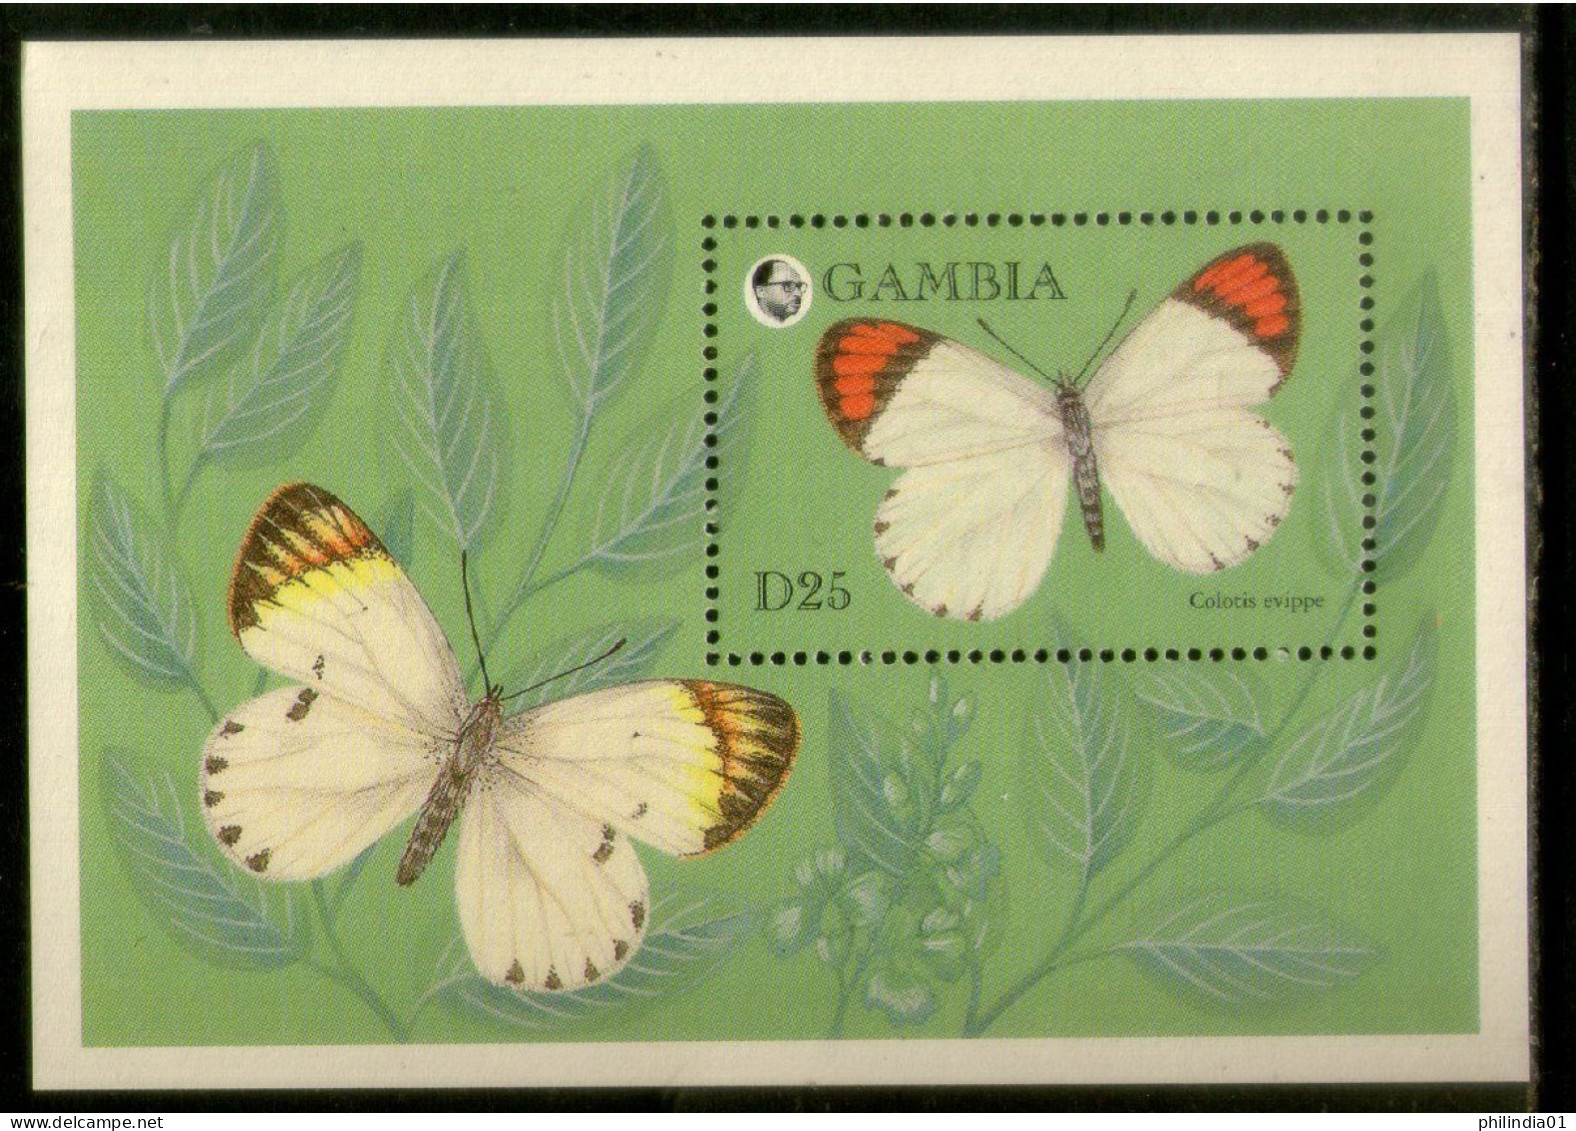 Gambia 1994 Butterflies Moth Insect Sc 1575 M/s MNH # 5306 - Farfalle